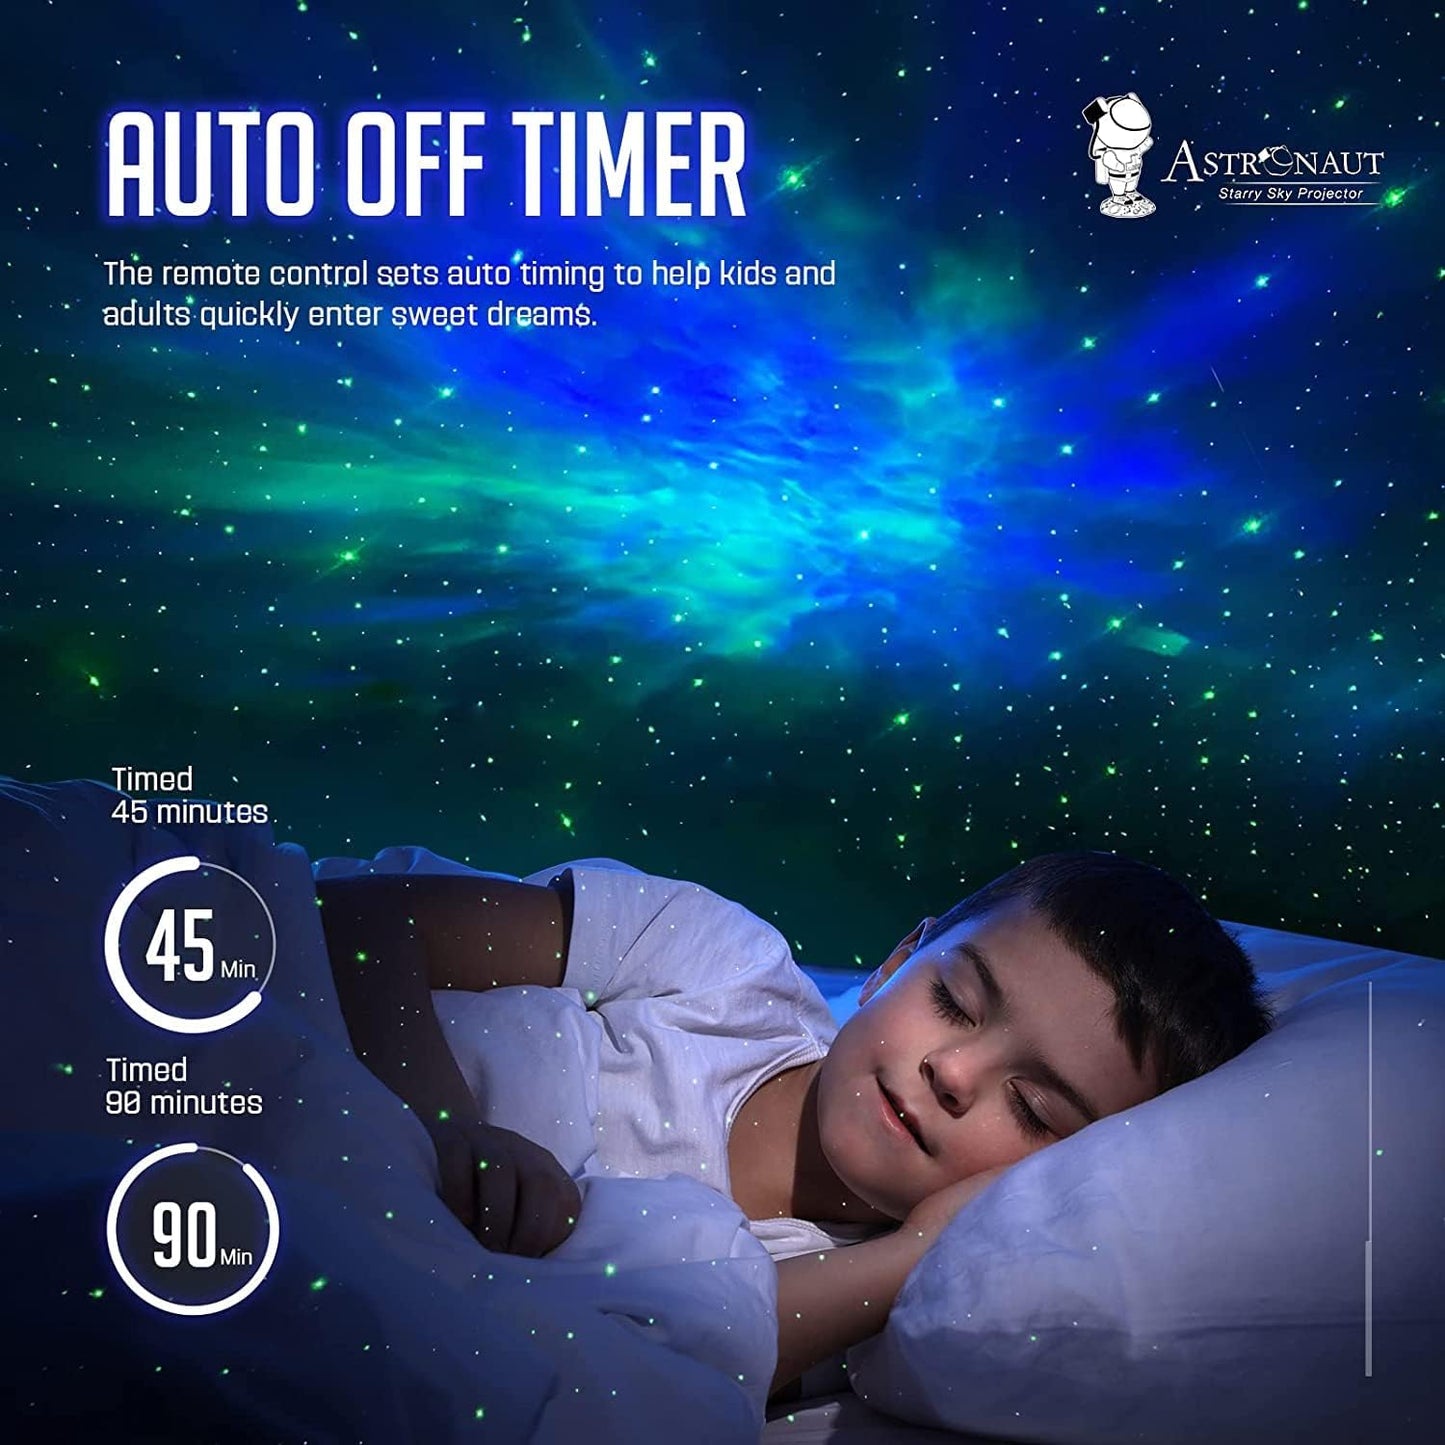 Astronaut star projector galaxy night light, nebula ceiling LED lamp with timer and remote astronaut starry sky light